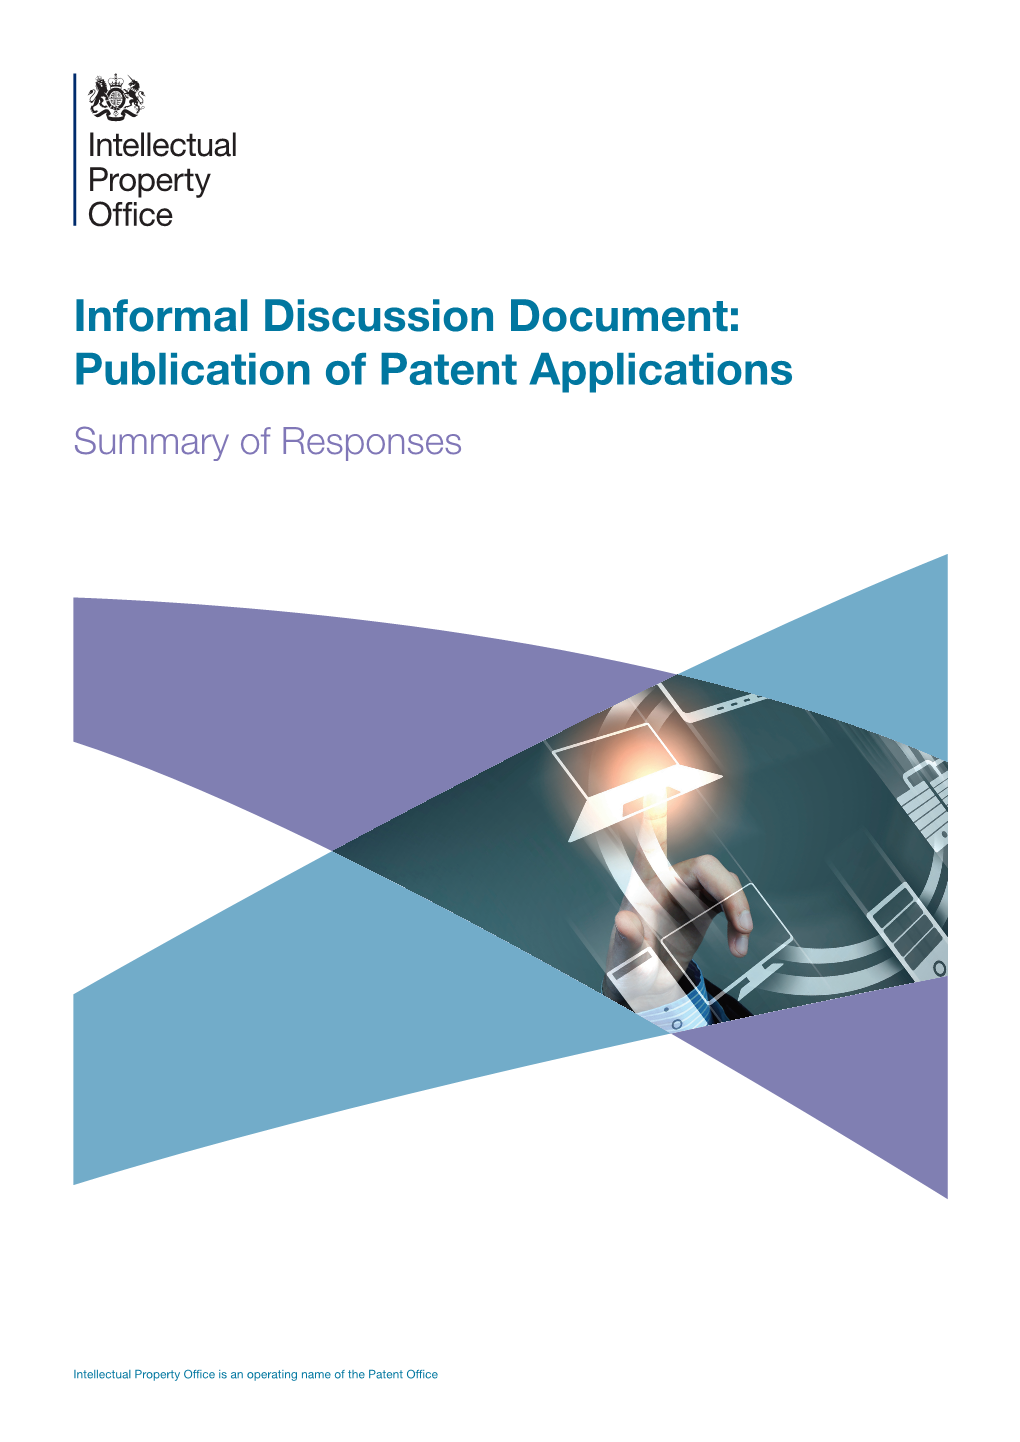 Publication of Patent Applications Summary of Responses